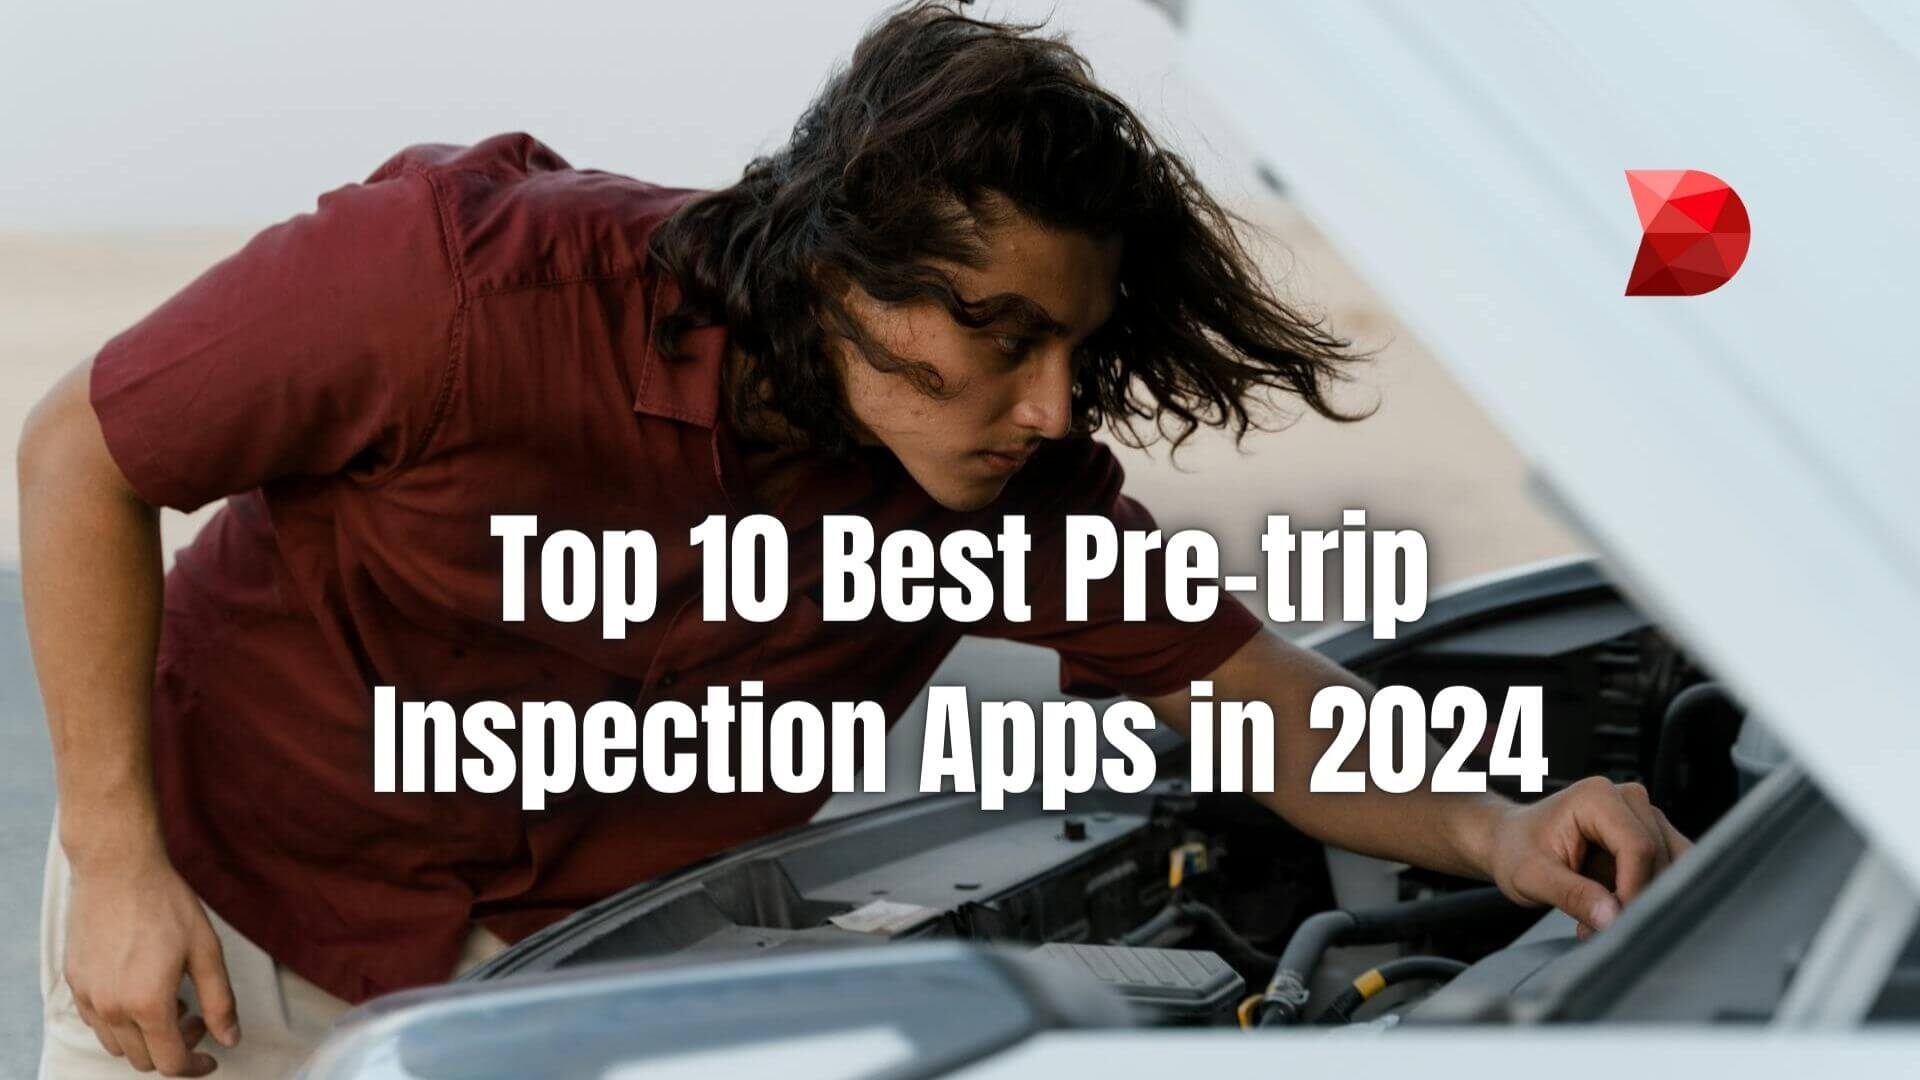 Navigate the world of pre-trip inspection apps! Explore the top 10 options for 2024 and streamline your safety procedures effortlessly.